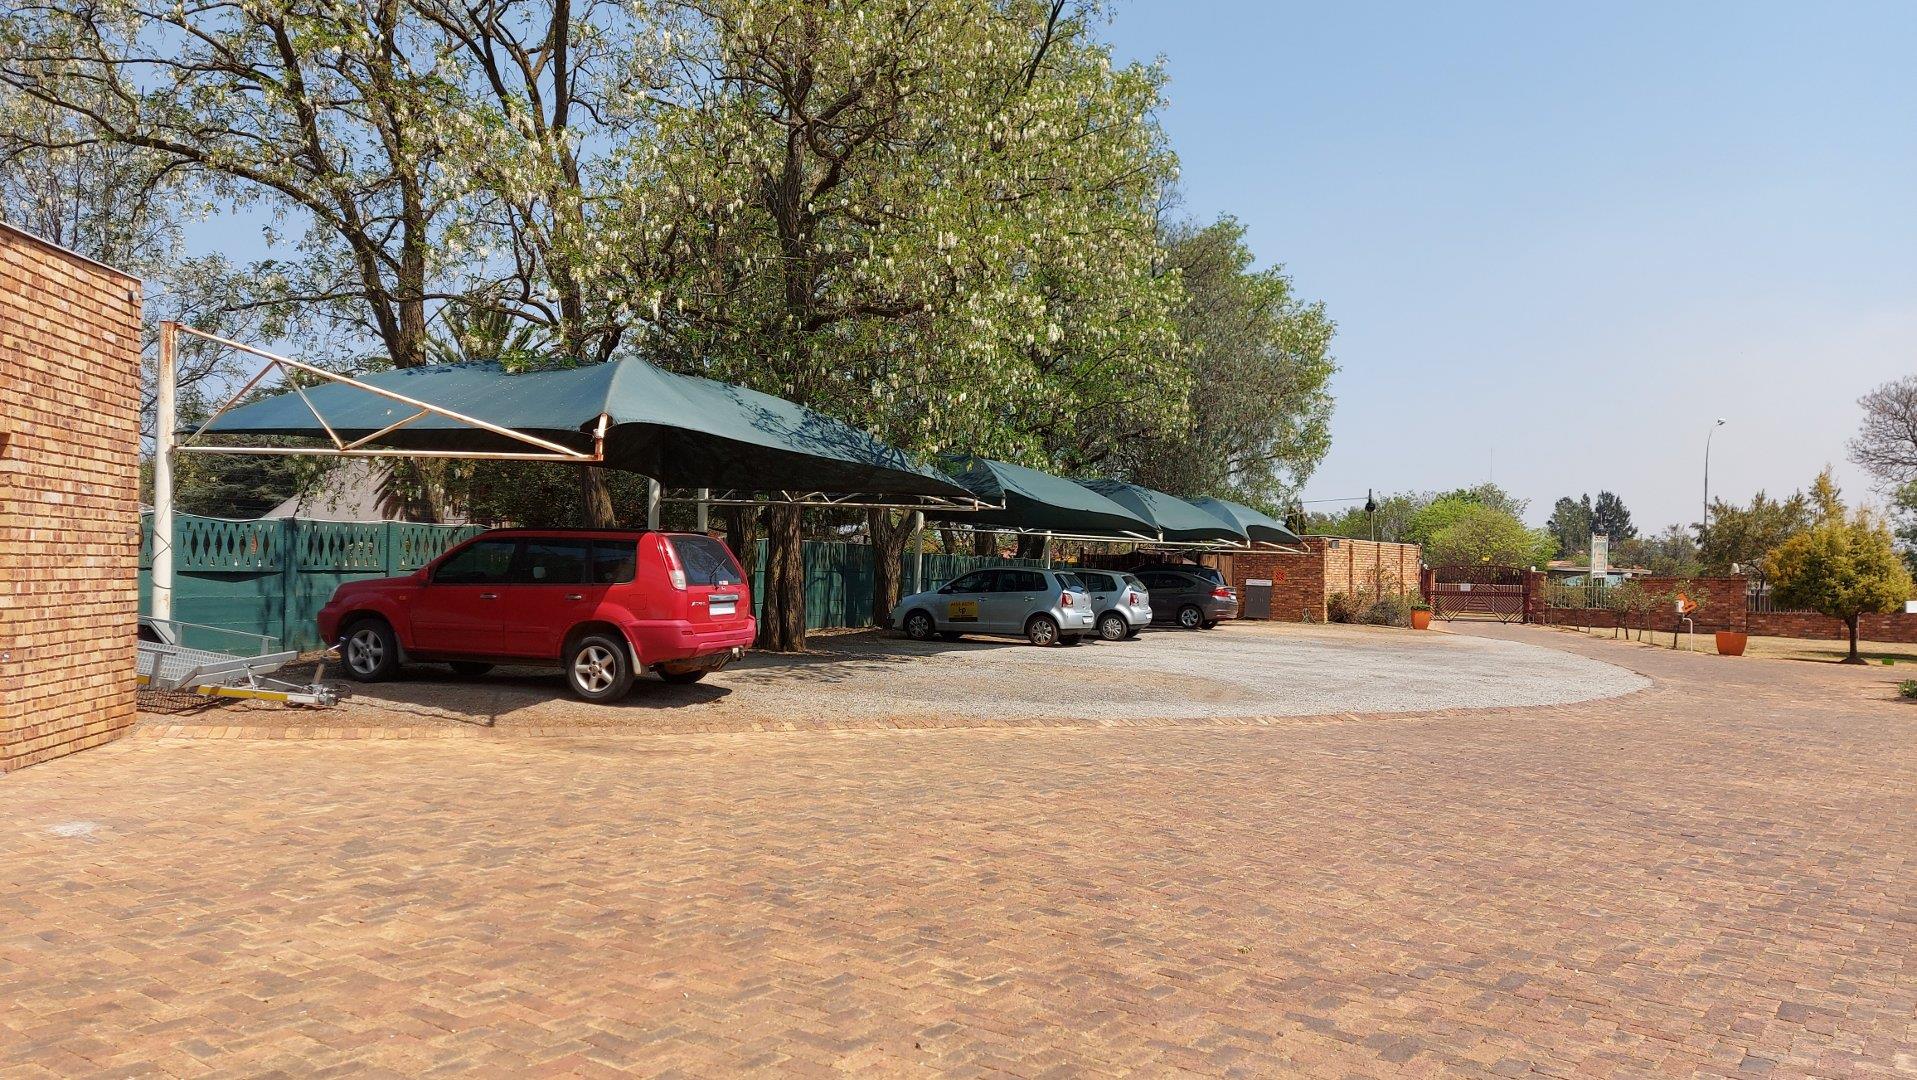 10 Bedroom Property for Sale in Benoni Small Farms Gauteng